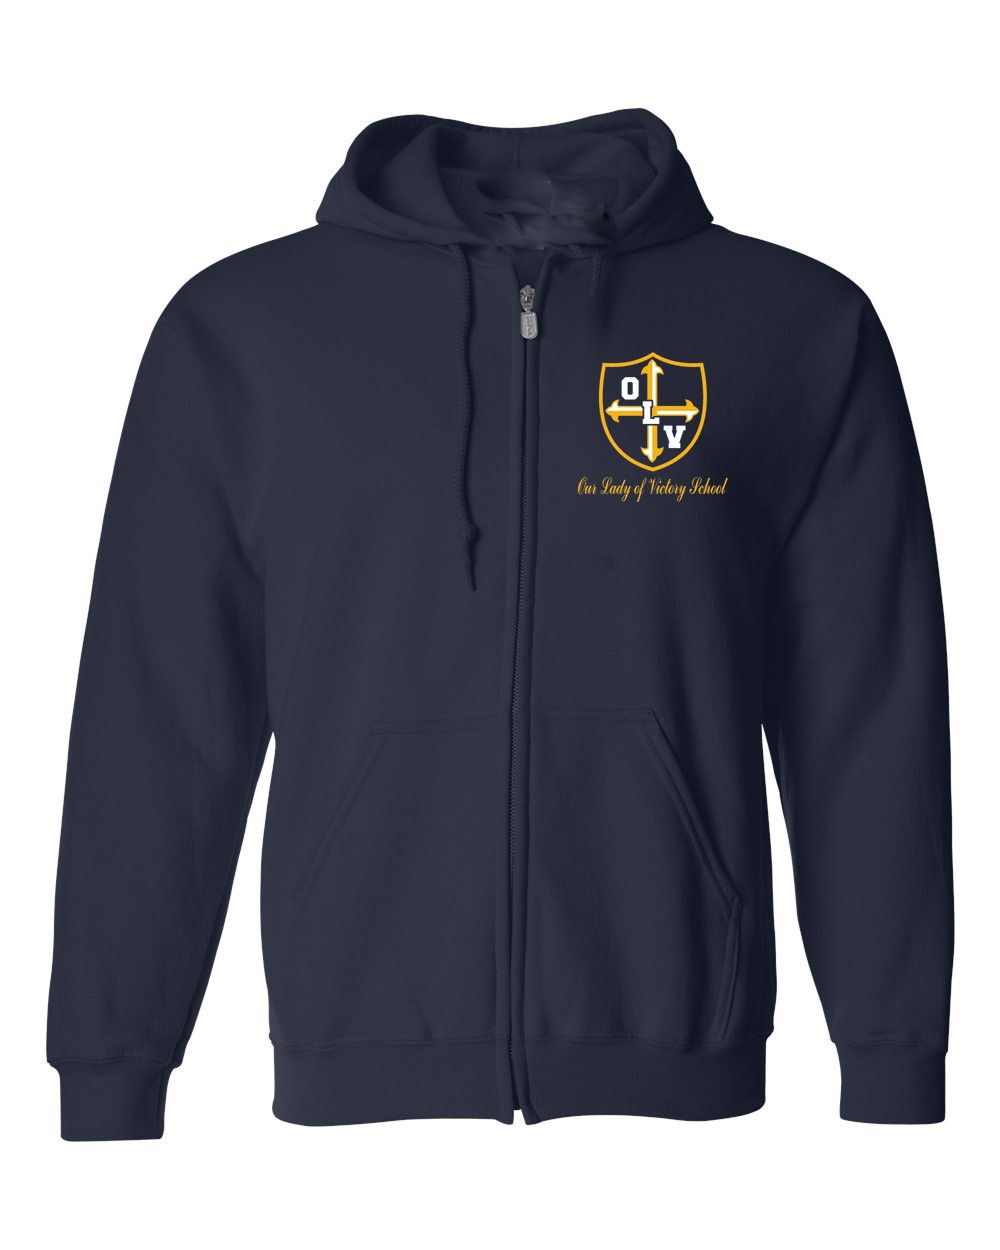 OLV Class of 2024 Zipper Hoodie w/ Logo - Please Allow 2-3 Weeks for Delivery